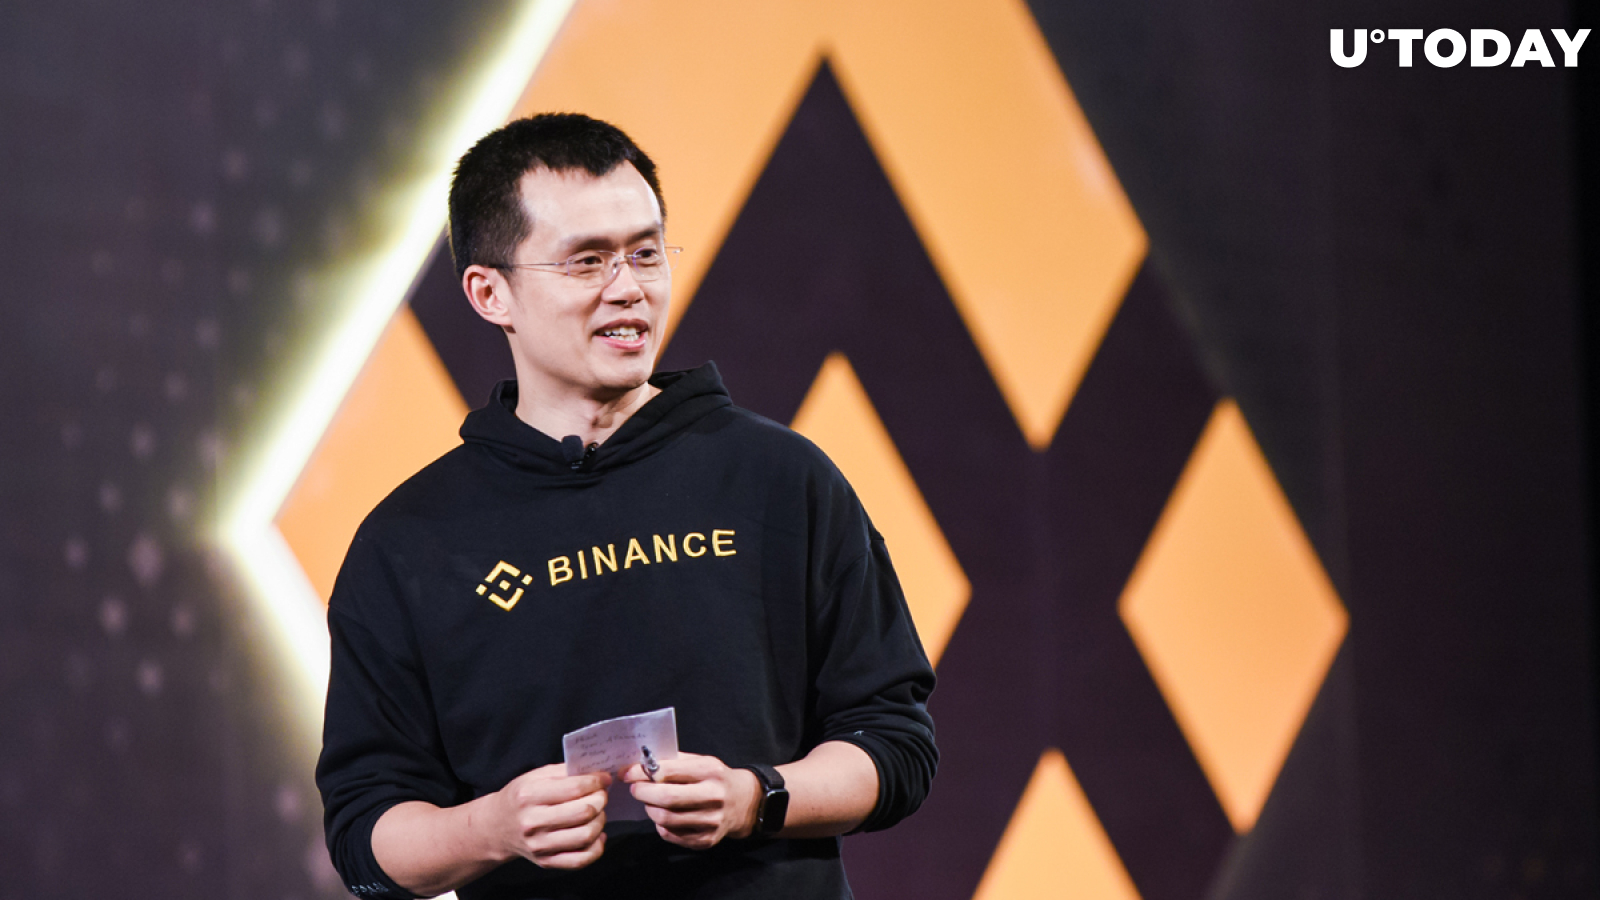 CZ Binance Says Twitter Hack Was "Net Positive" for Bitcoin, Here’s Why